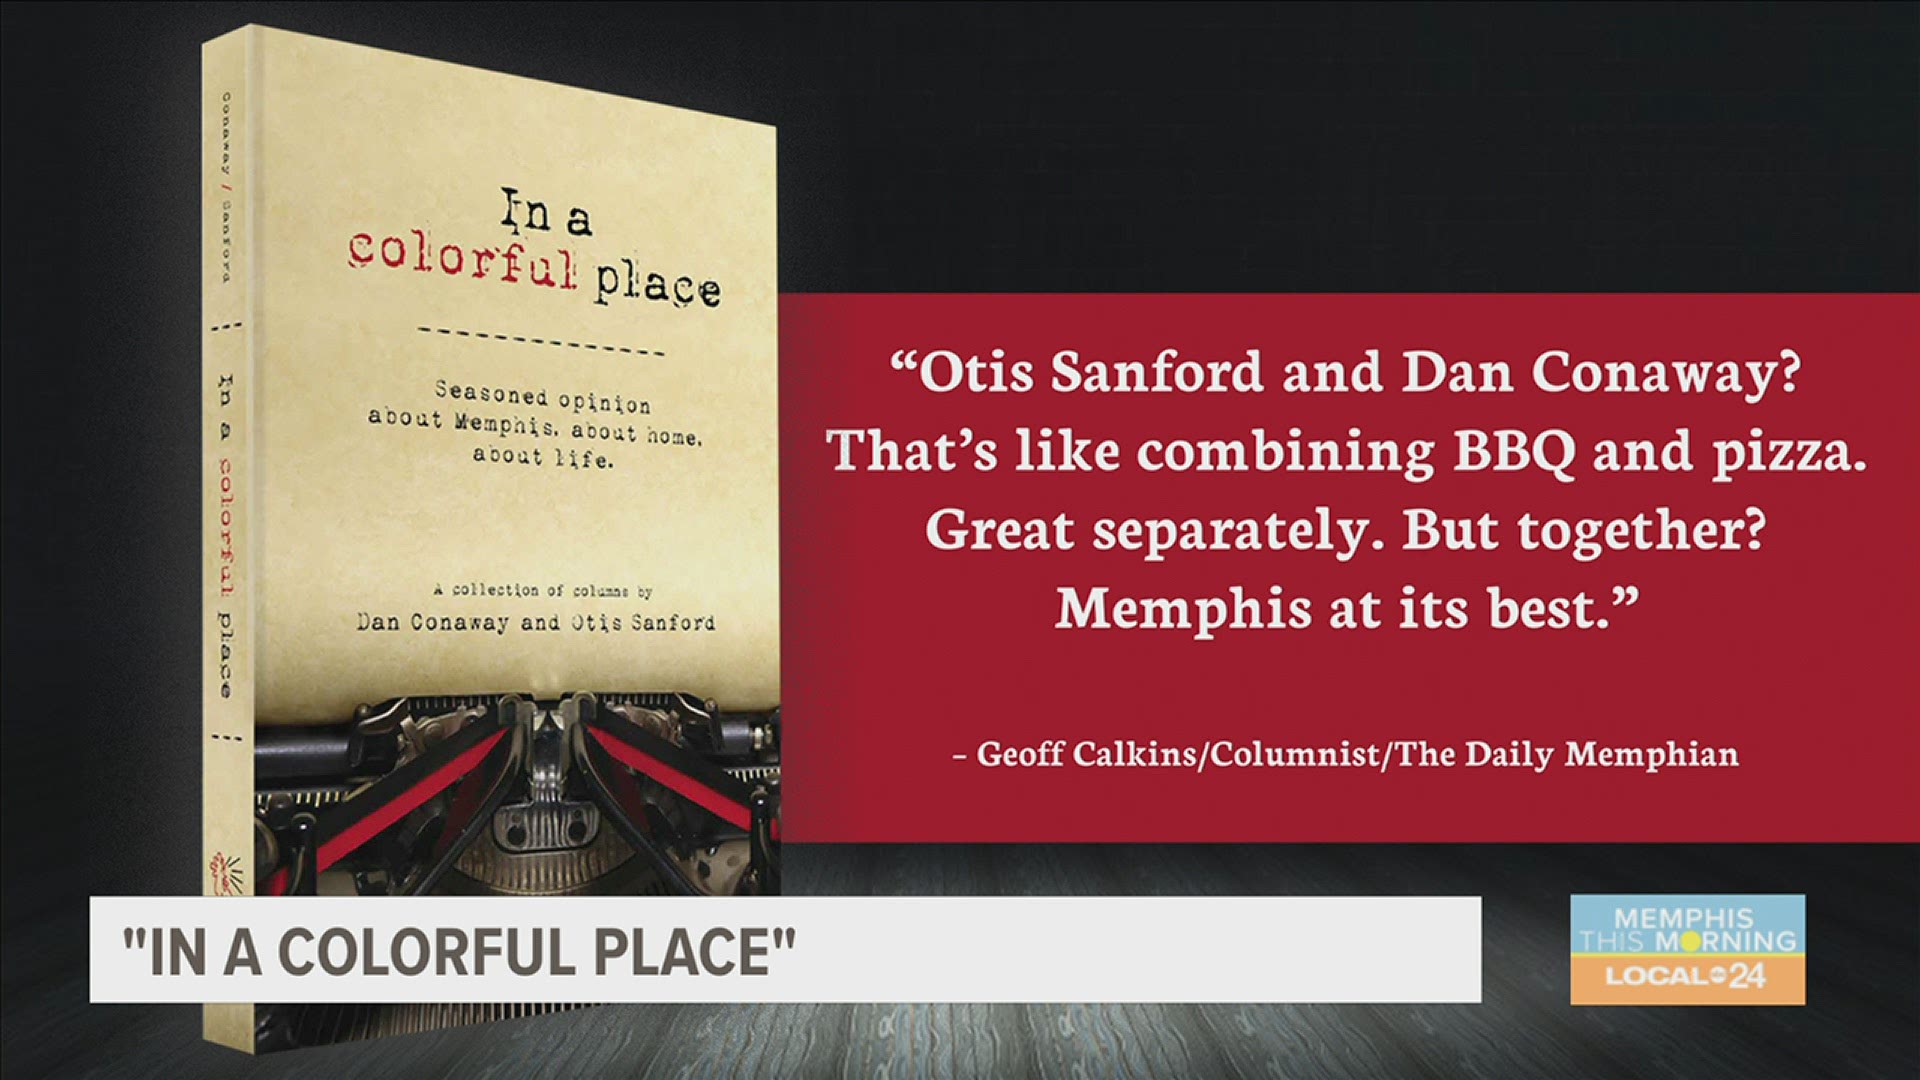 Co-written by Dan Conaway-enjoy a "Seasoned opinion about Memphis, home and life"